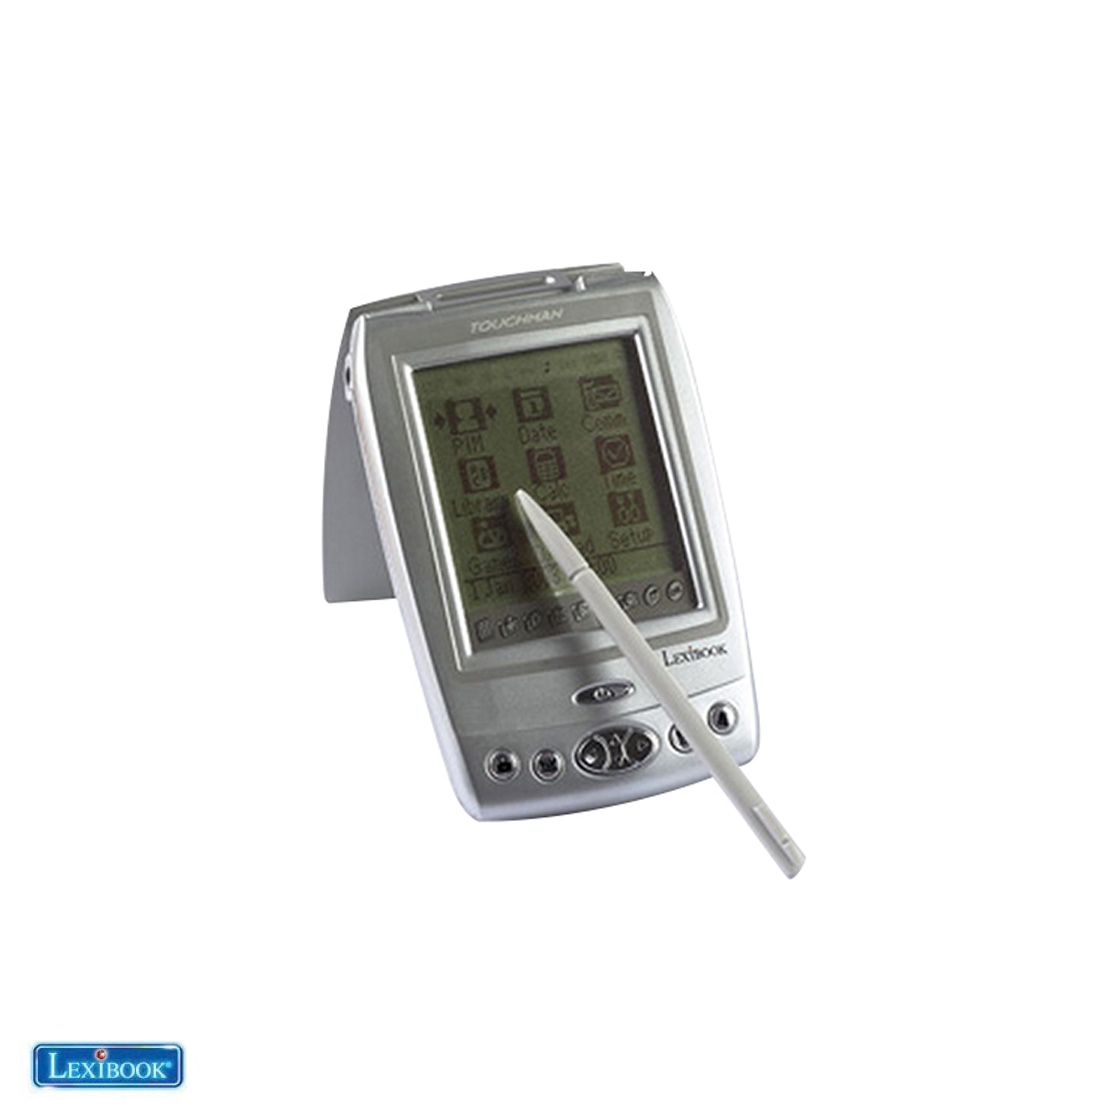 4MB PDA With PC link (large graphic 8 line screen)_product